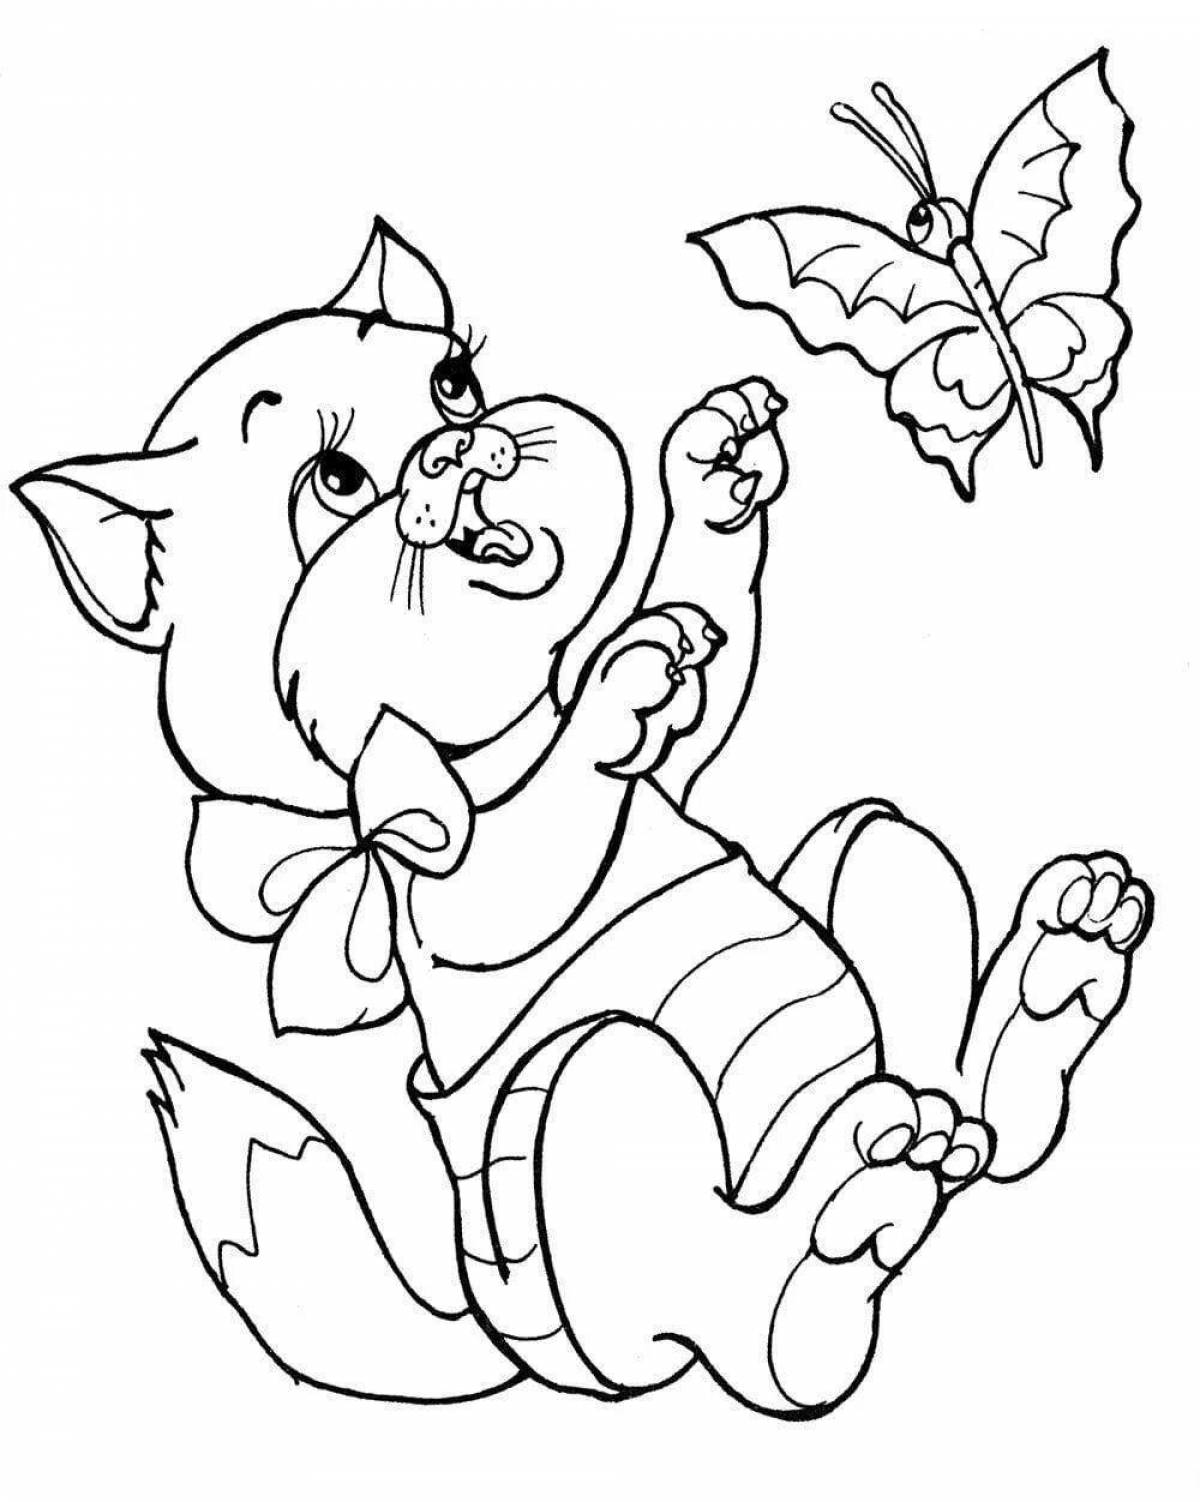 Playful katunket coloring page